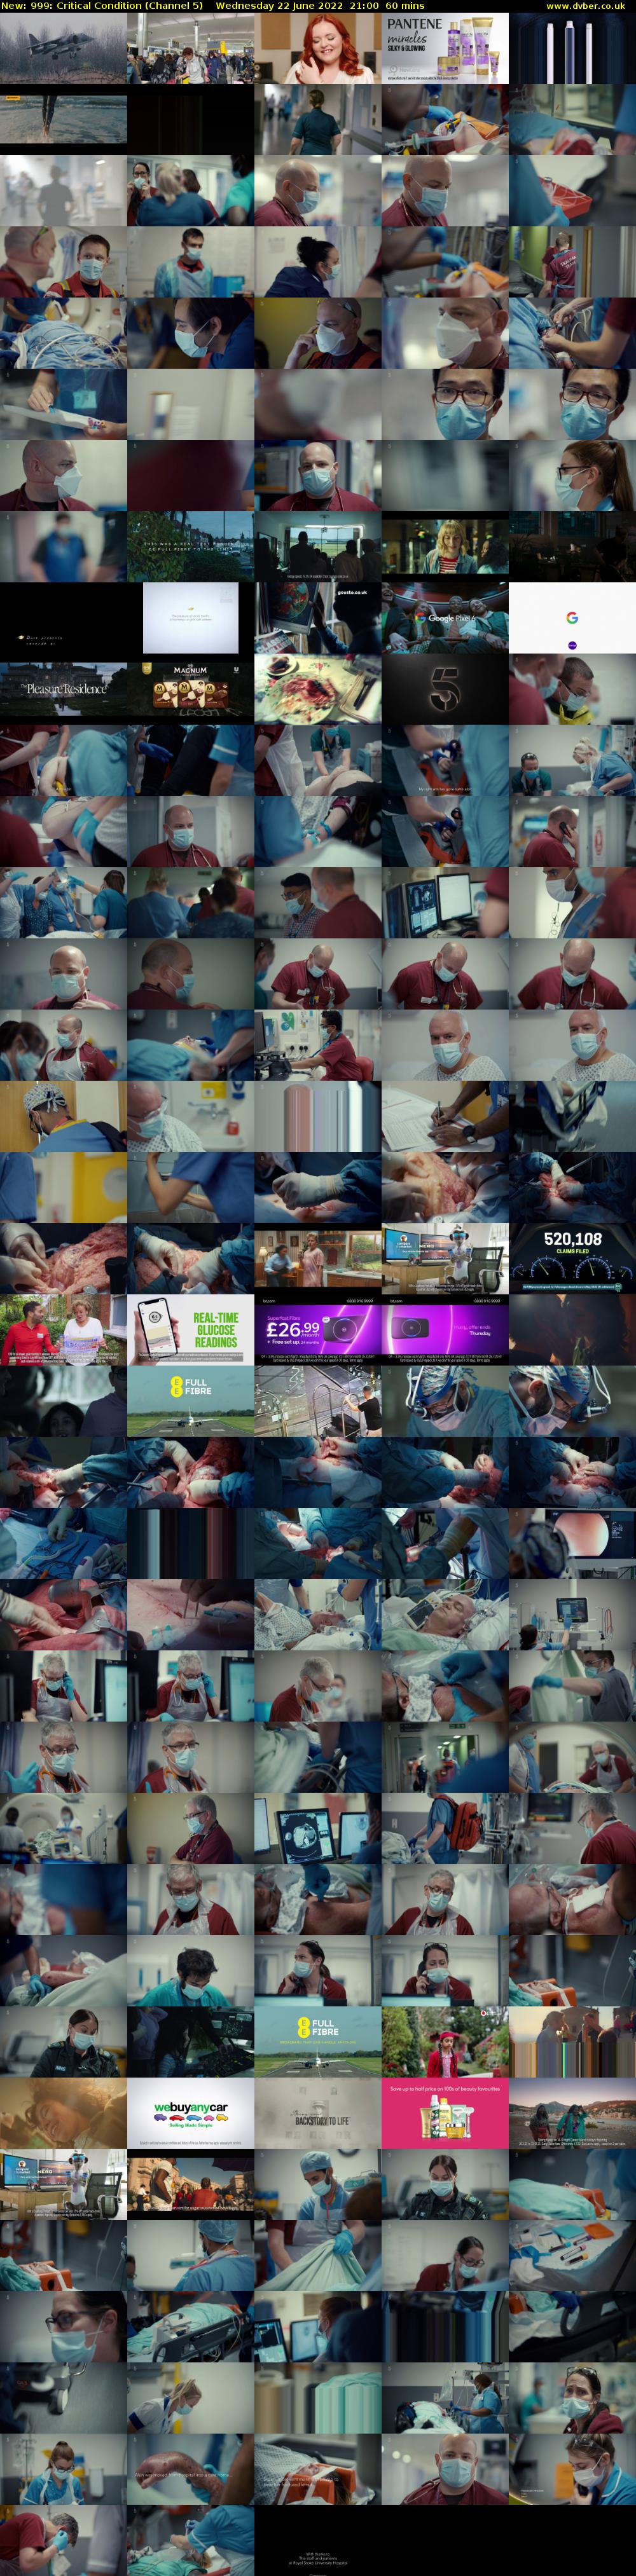 999: Critical Condition (Channel 5) Wednesday 22 June 2022 21:00 - 22:00